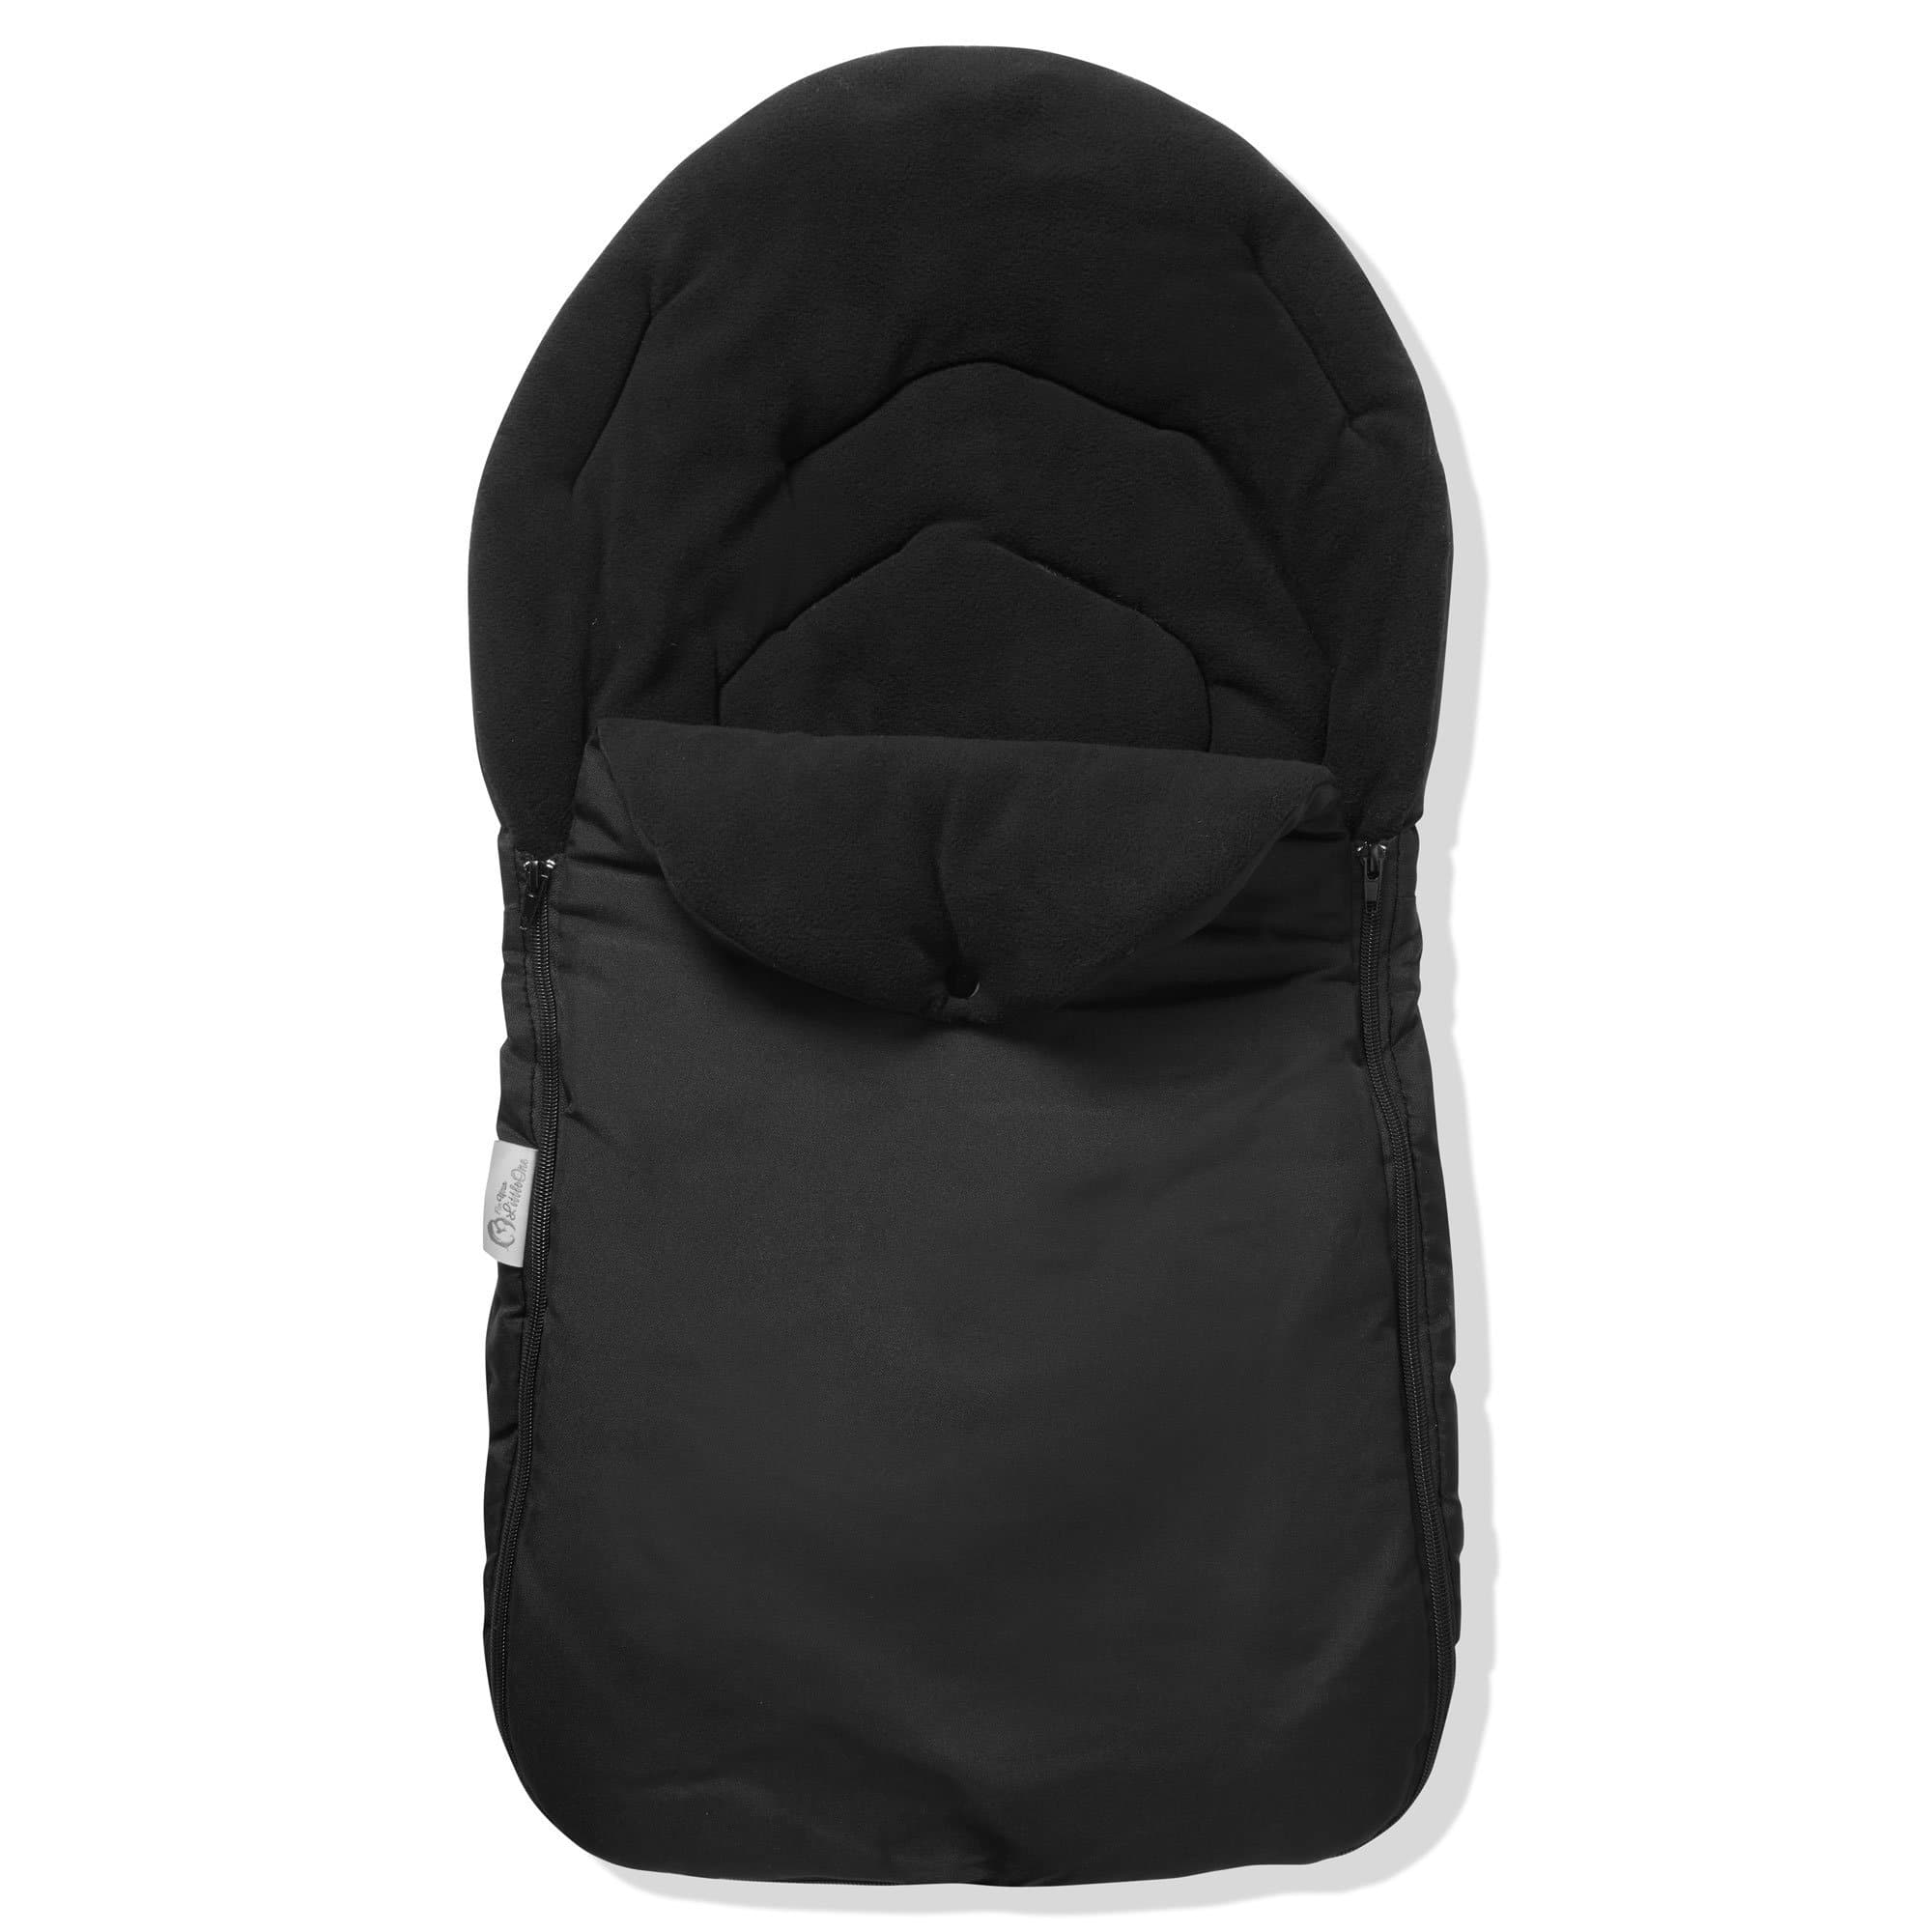 Car Seat Footmuff / Cosy Toes Compatible with Mountain Buggy - Black / Fits All Models | For Your Little One